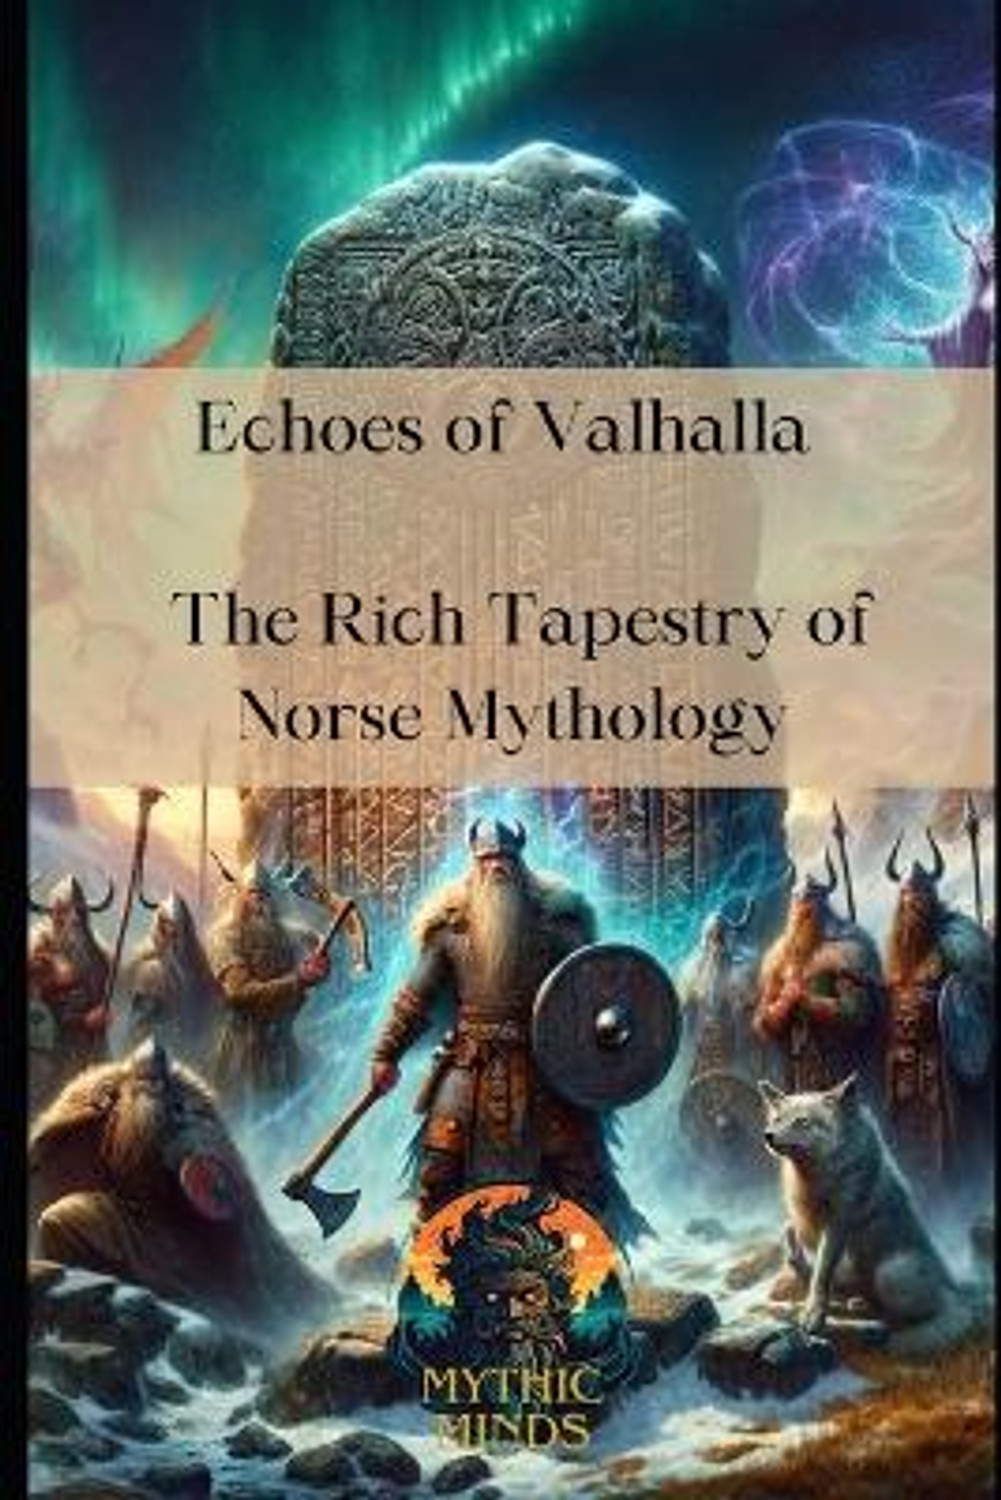 Echoes of Valhalla: The Rich Tapestry of Norse Mythology Mythic Minds ...